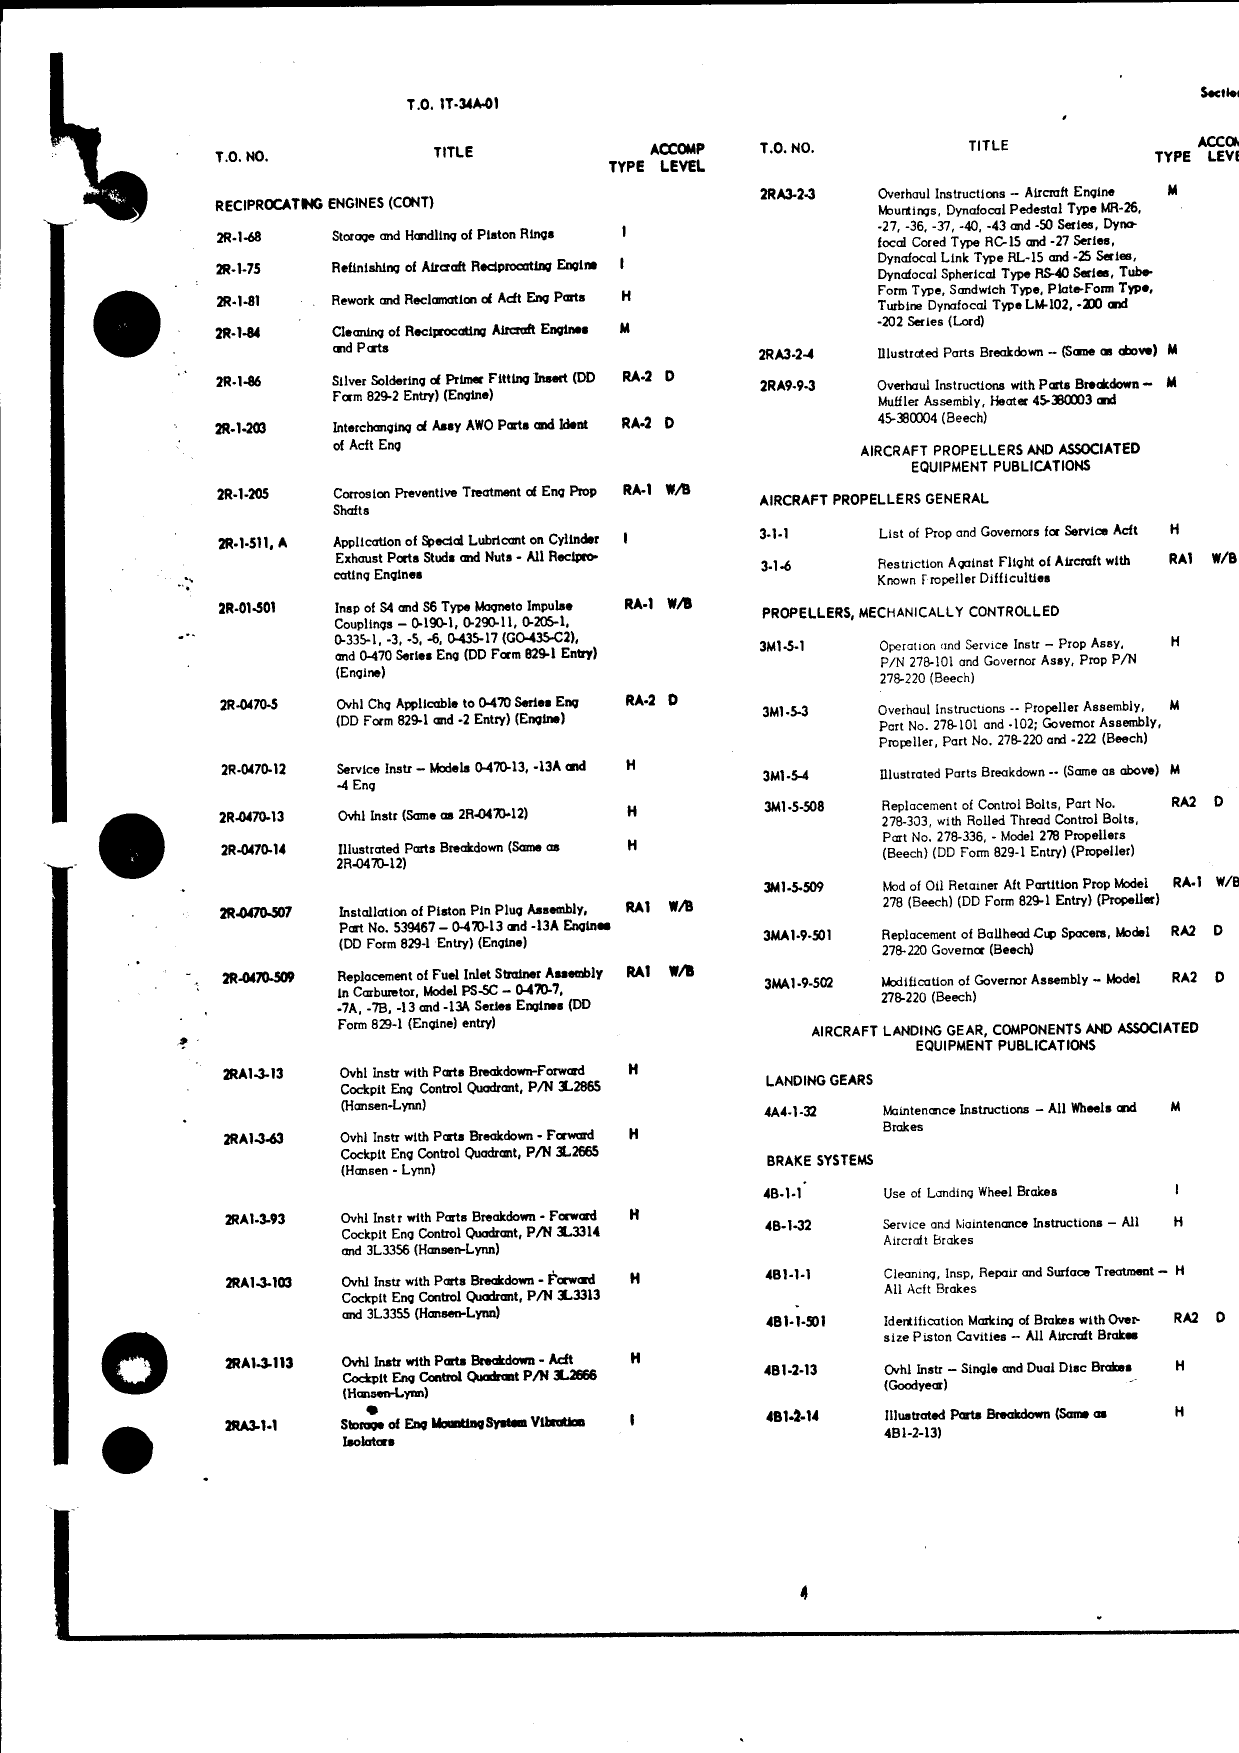 Sample page 5 from AirCorps Library document: List of Applicable Publications for T-34A Aircraft and Equipment